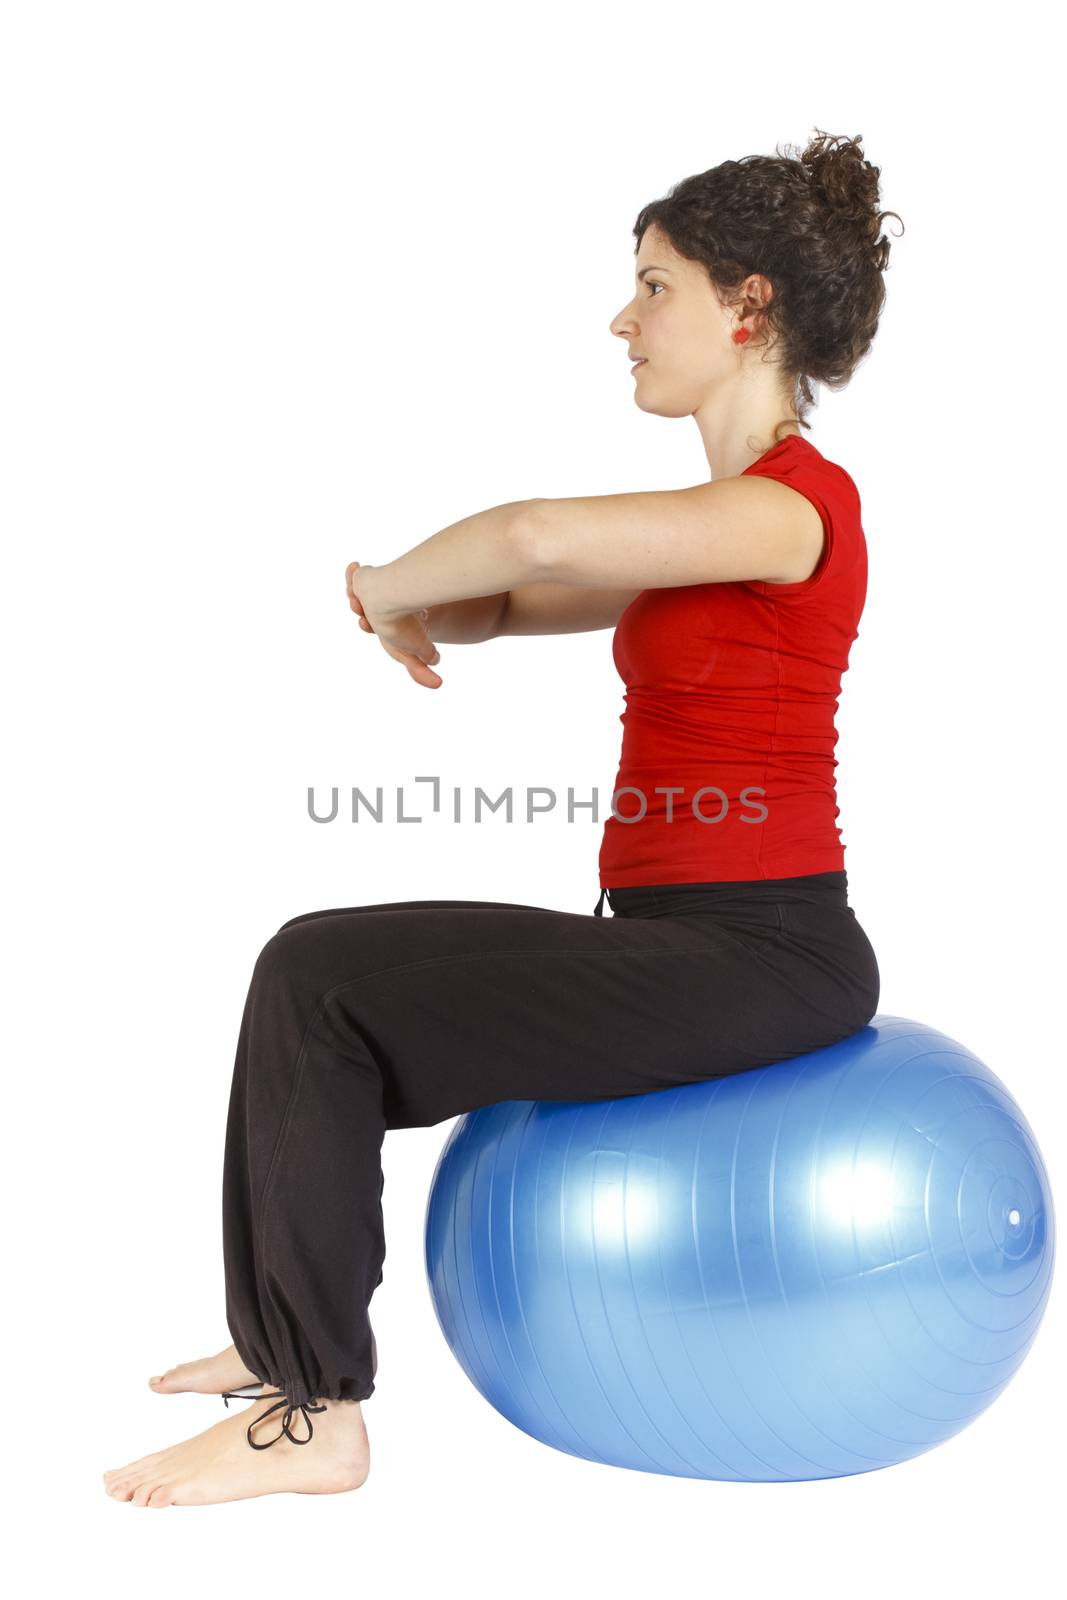 Young woman sitting on a blue yoga ball doing an exercise.